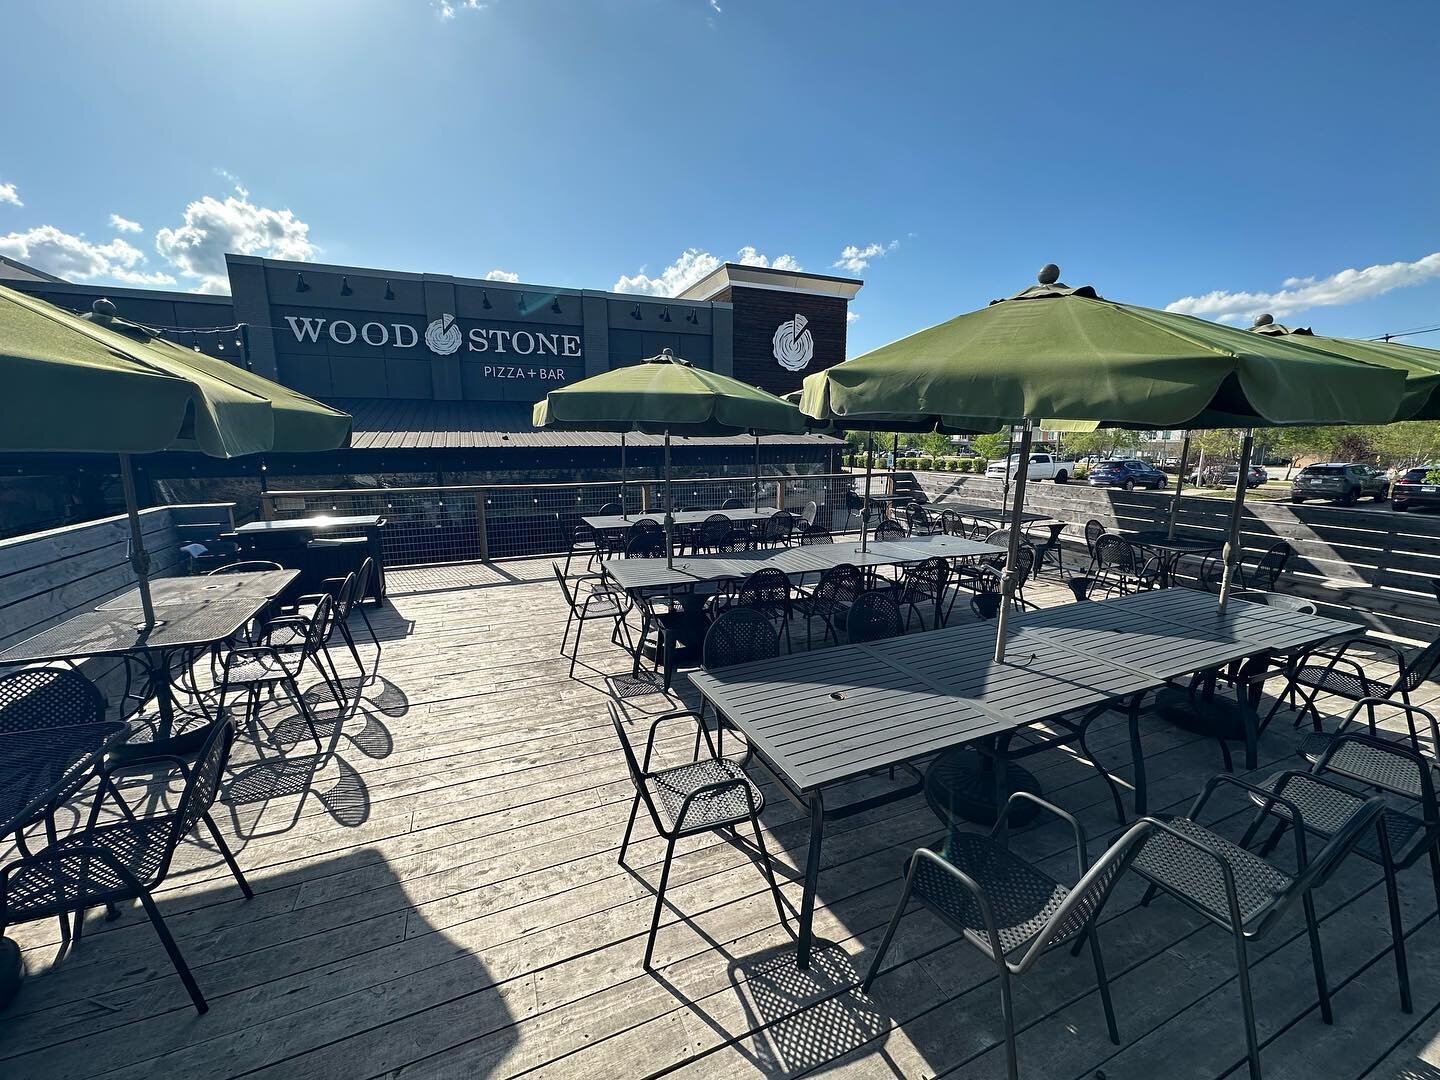 DECKS &amp; PATIOS ARE OPEN! It is outdoor dining season and we have outdoor dining options at both locations. On the deck, covered patios, open sky, under umbrellas, full sun&hellip;so many options! 🍕 ☀️ 🍻